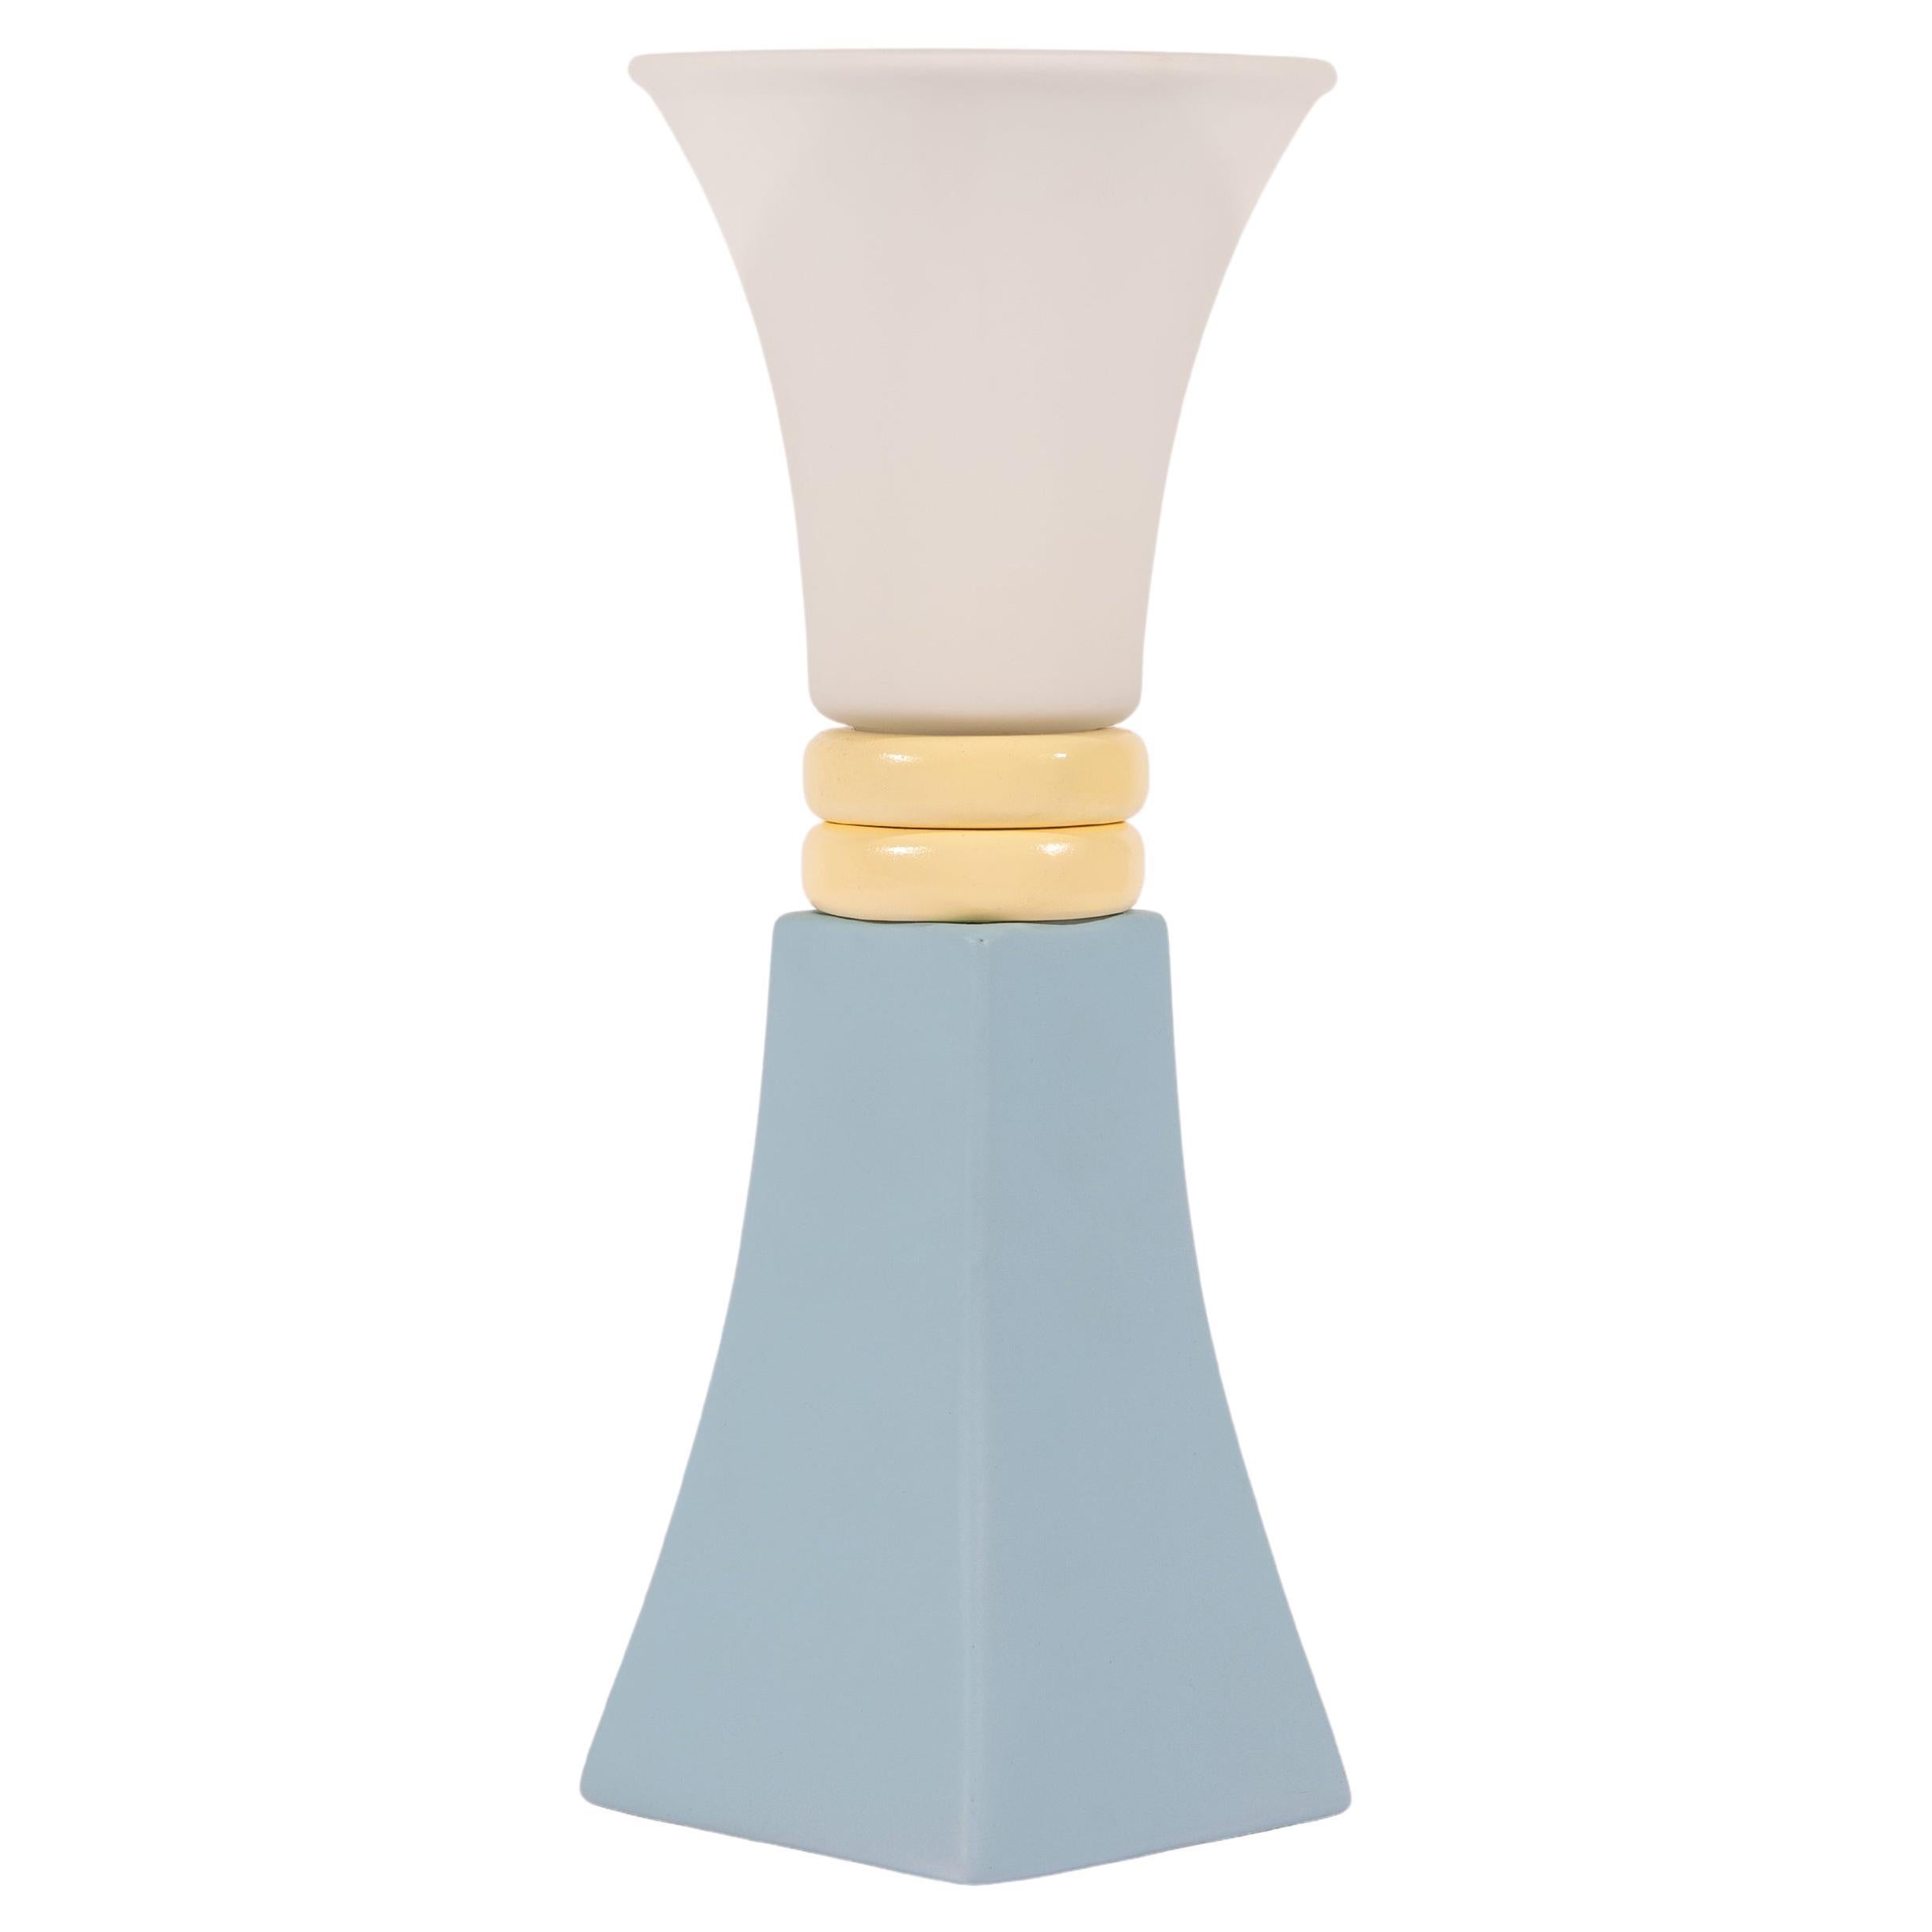 Light Blue and Yellow Unique Contemporary Table Lamp by Nusprodukt For Sale